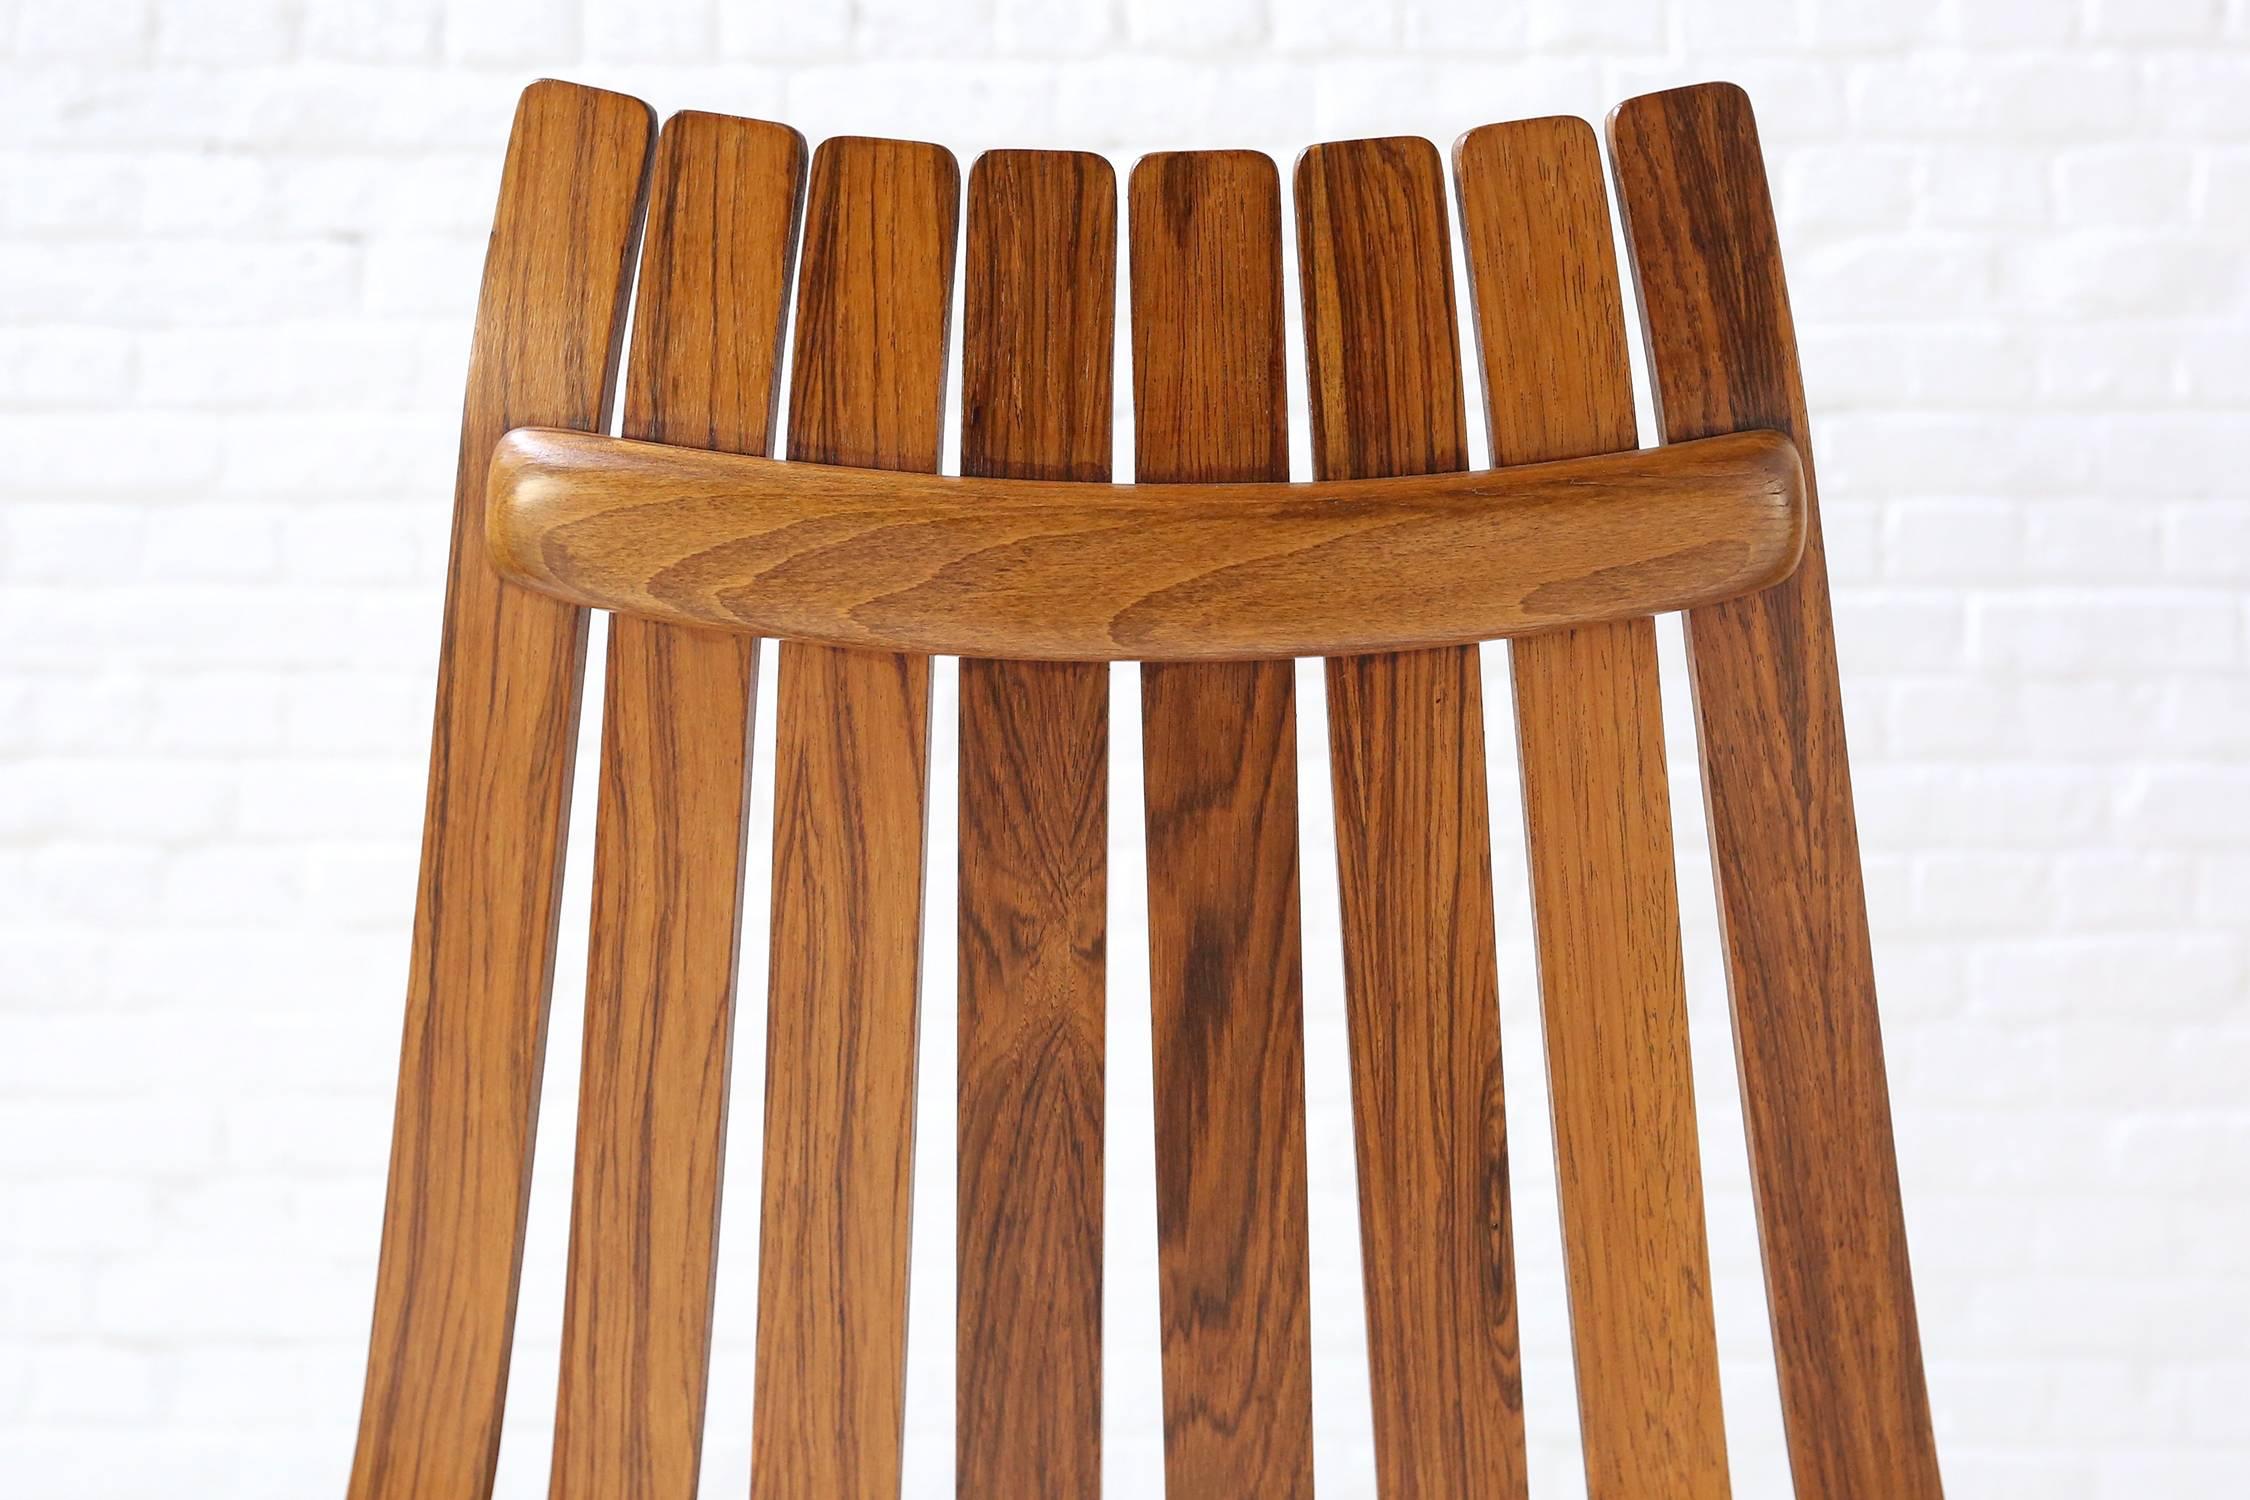 Scandinavian Modern Five Hans Brattrud Rosewood Scandia Chairs Produced by Hove Mobler Norway For Sale